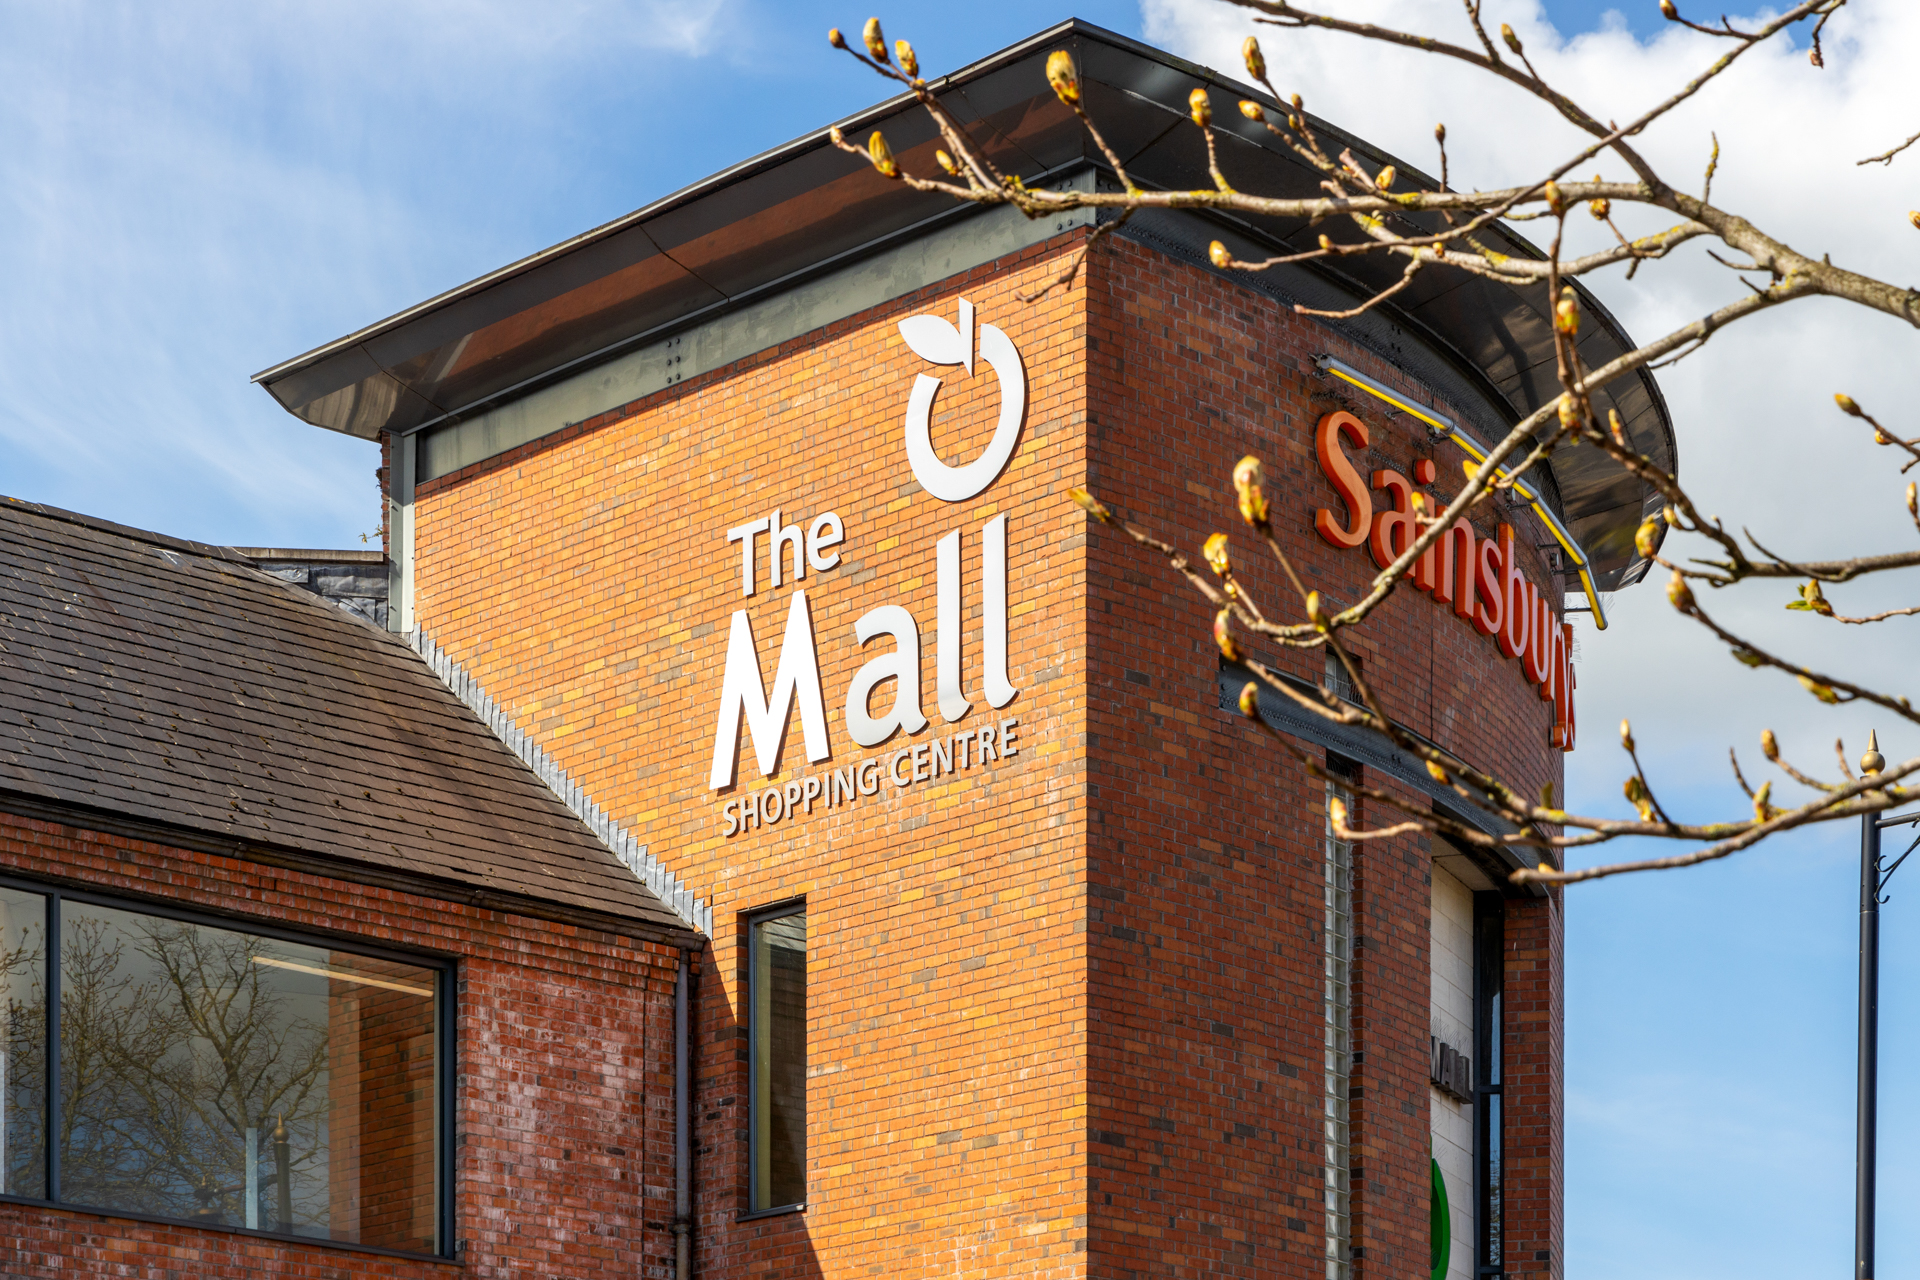 New ownership signals exciting retail opportunities at The Mall Armagh